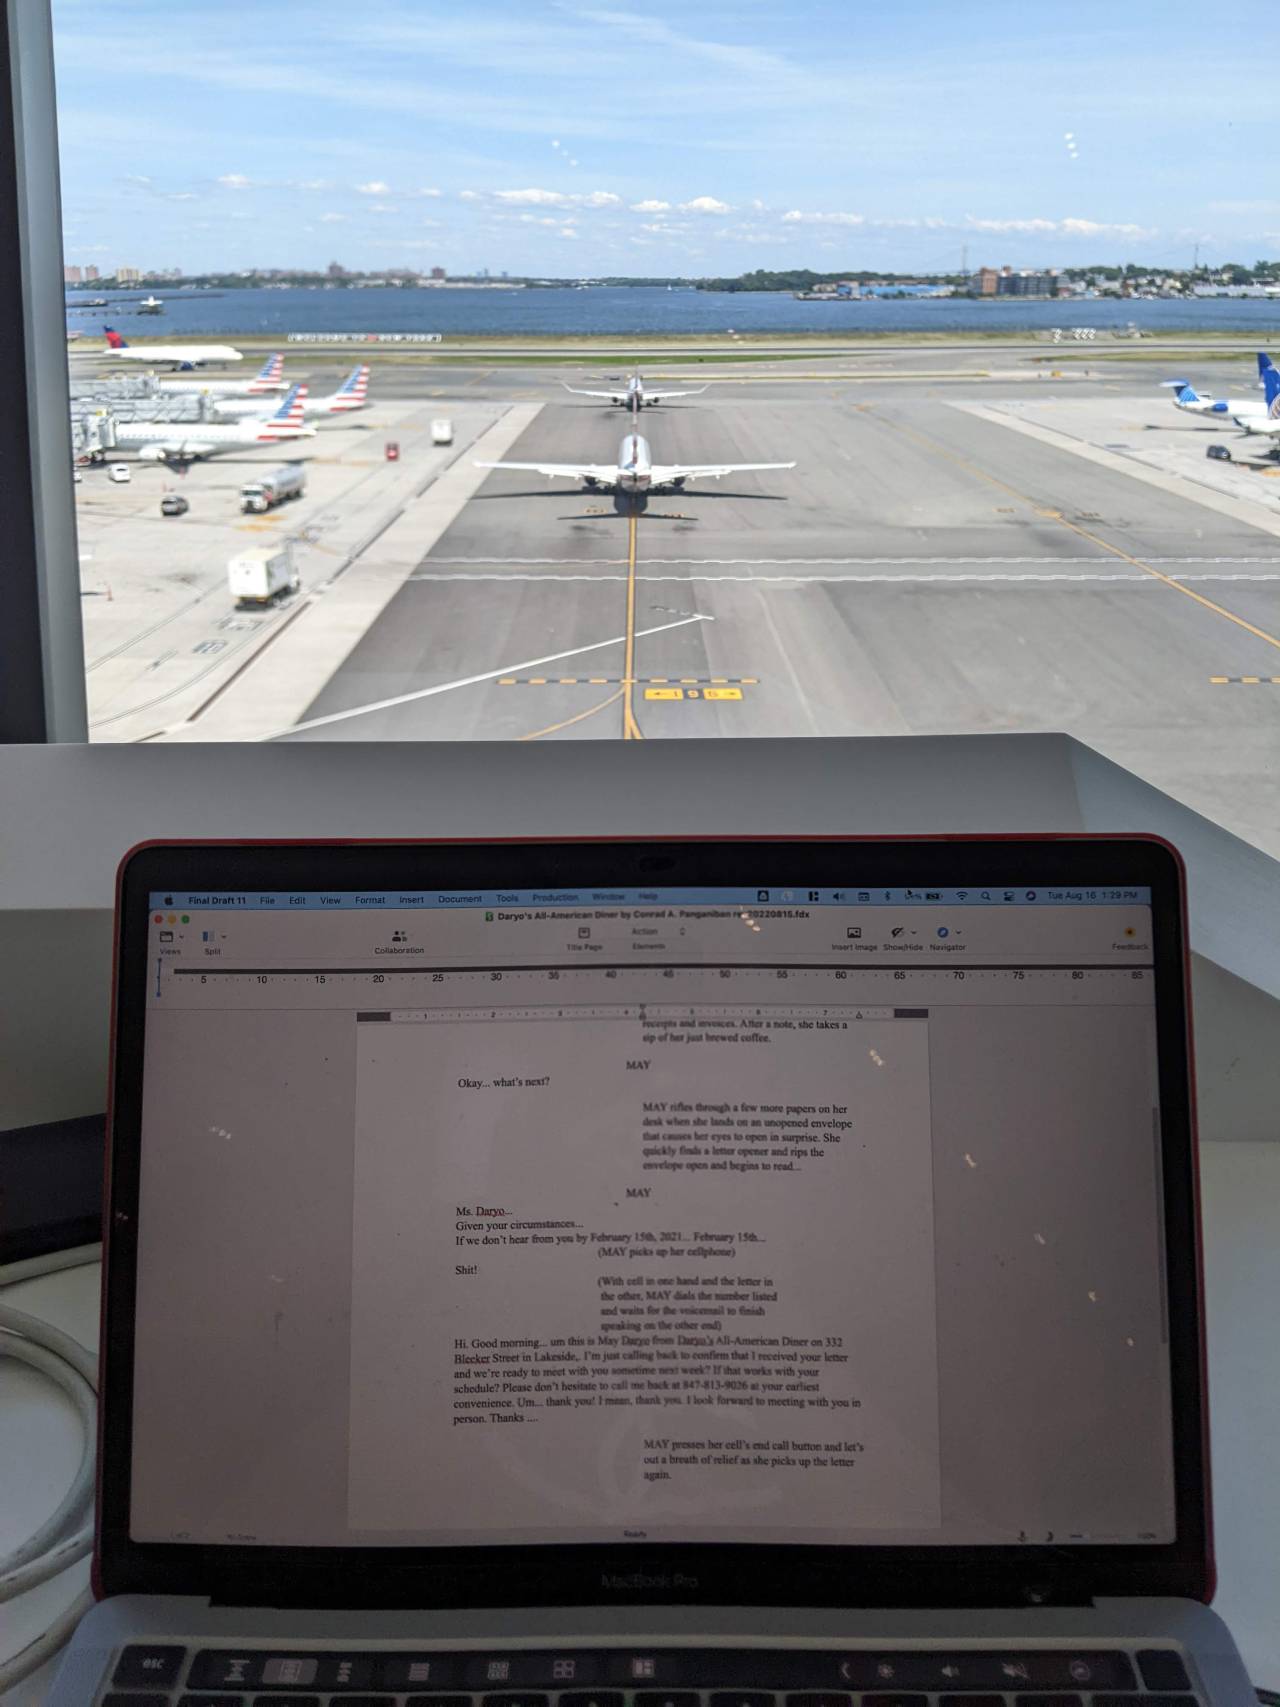 Pictured: Getting some writing done outside a flight gate at La Guardia, NYC waiting for a ride back to the Bay Area.